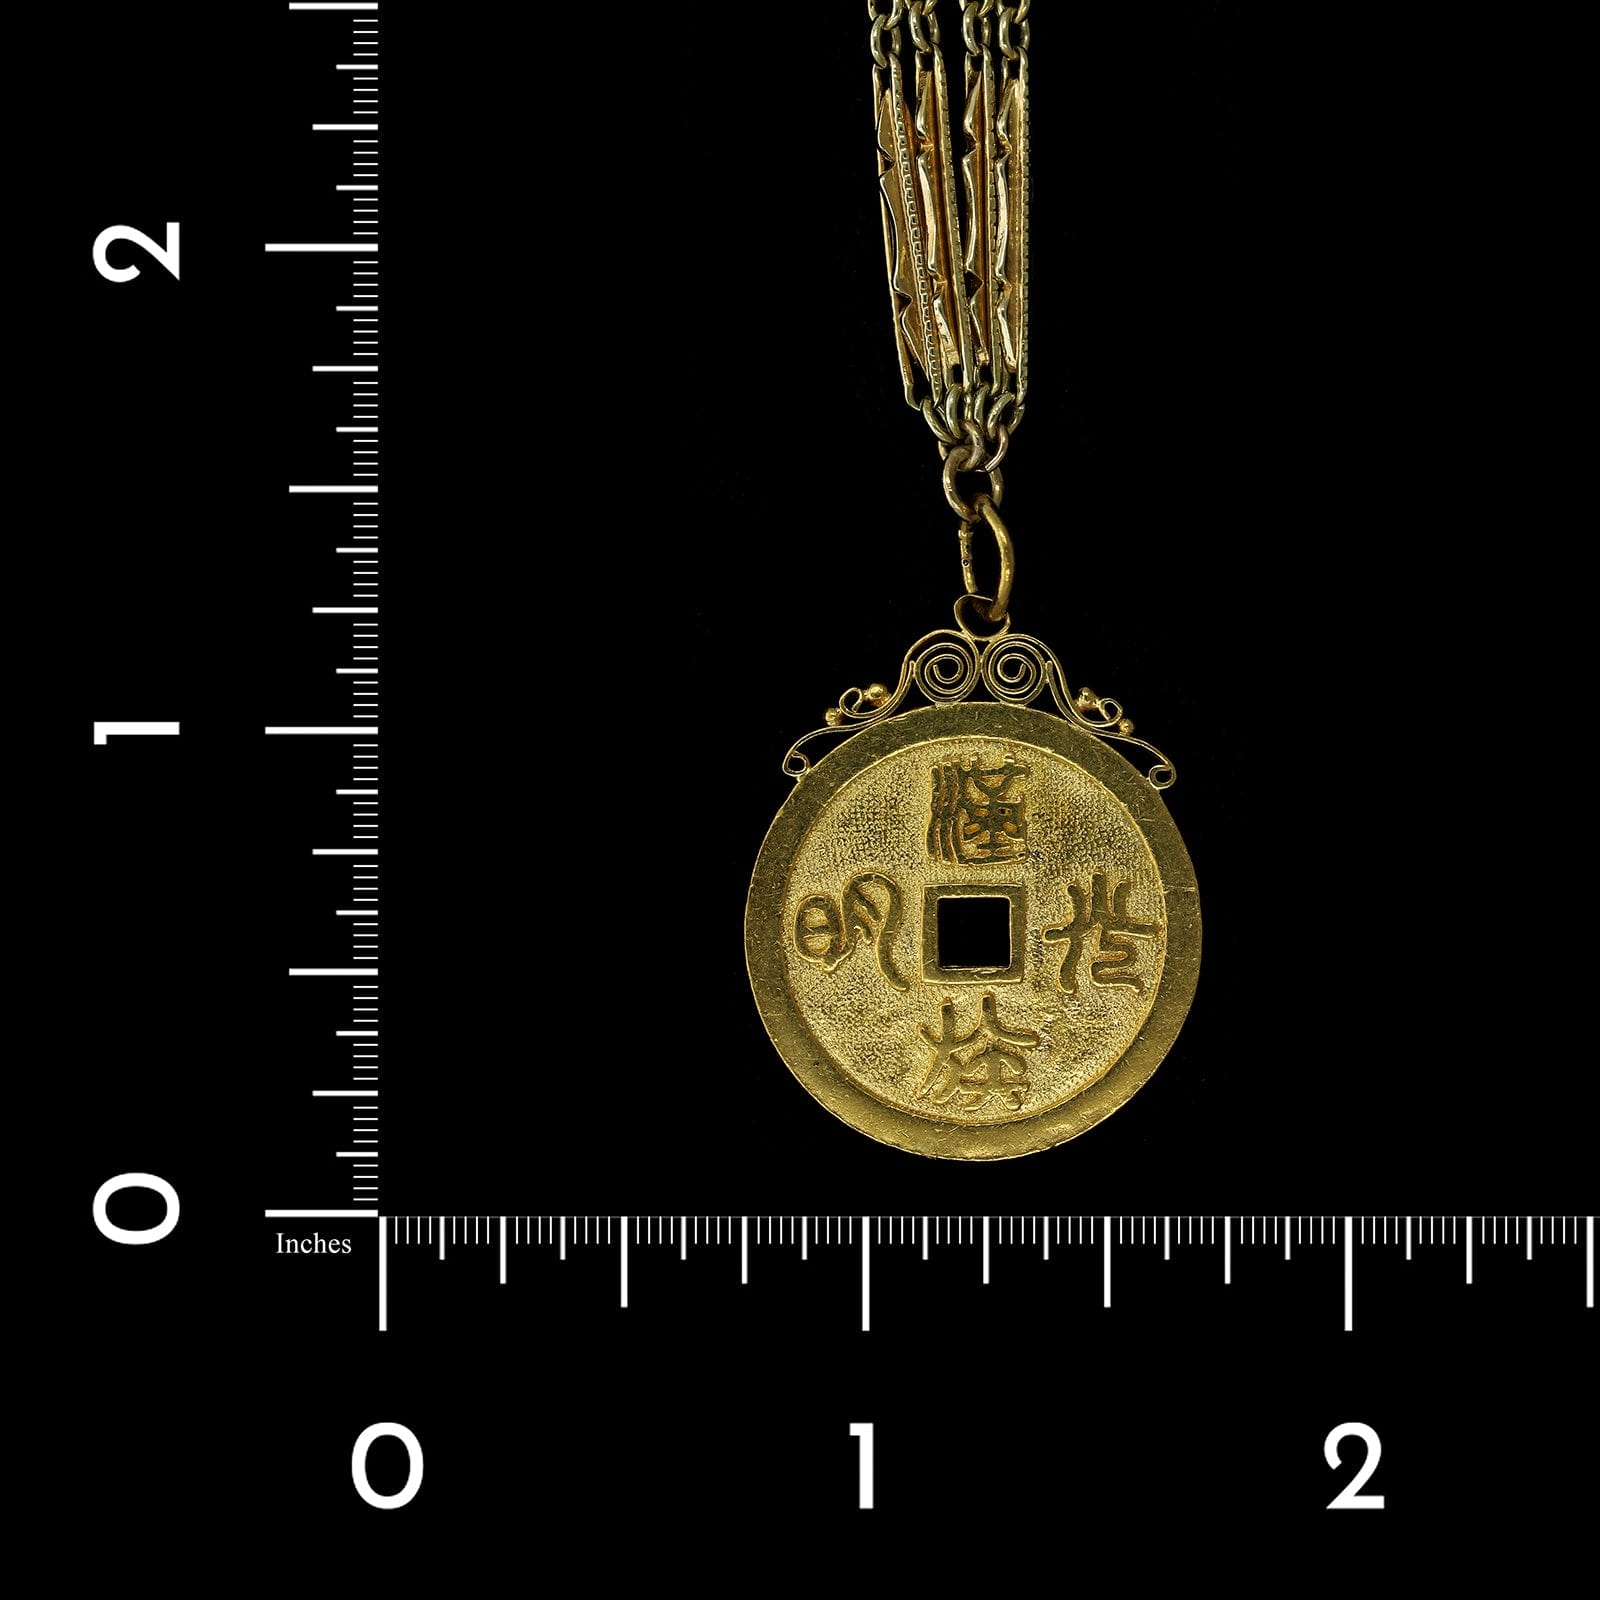 14K and 24K Yellow Gold Estate Chinese Coin Style Pendant